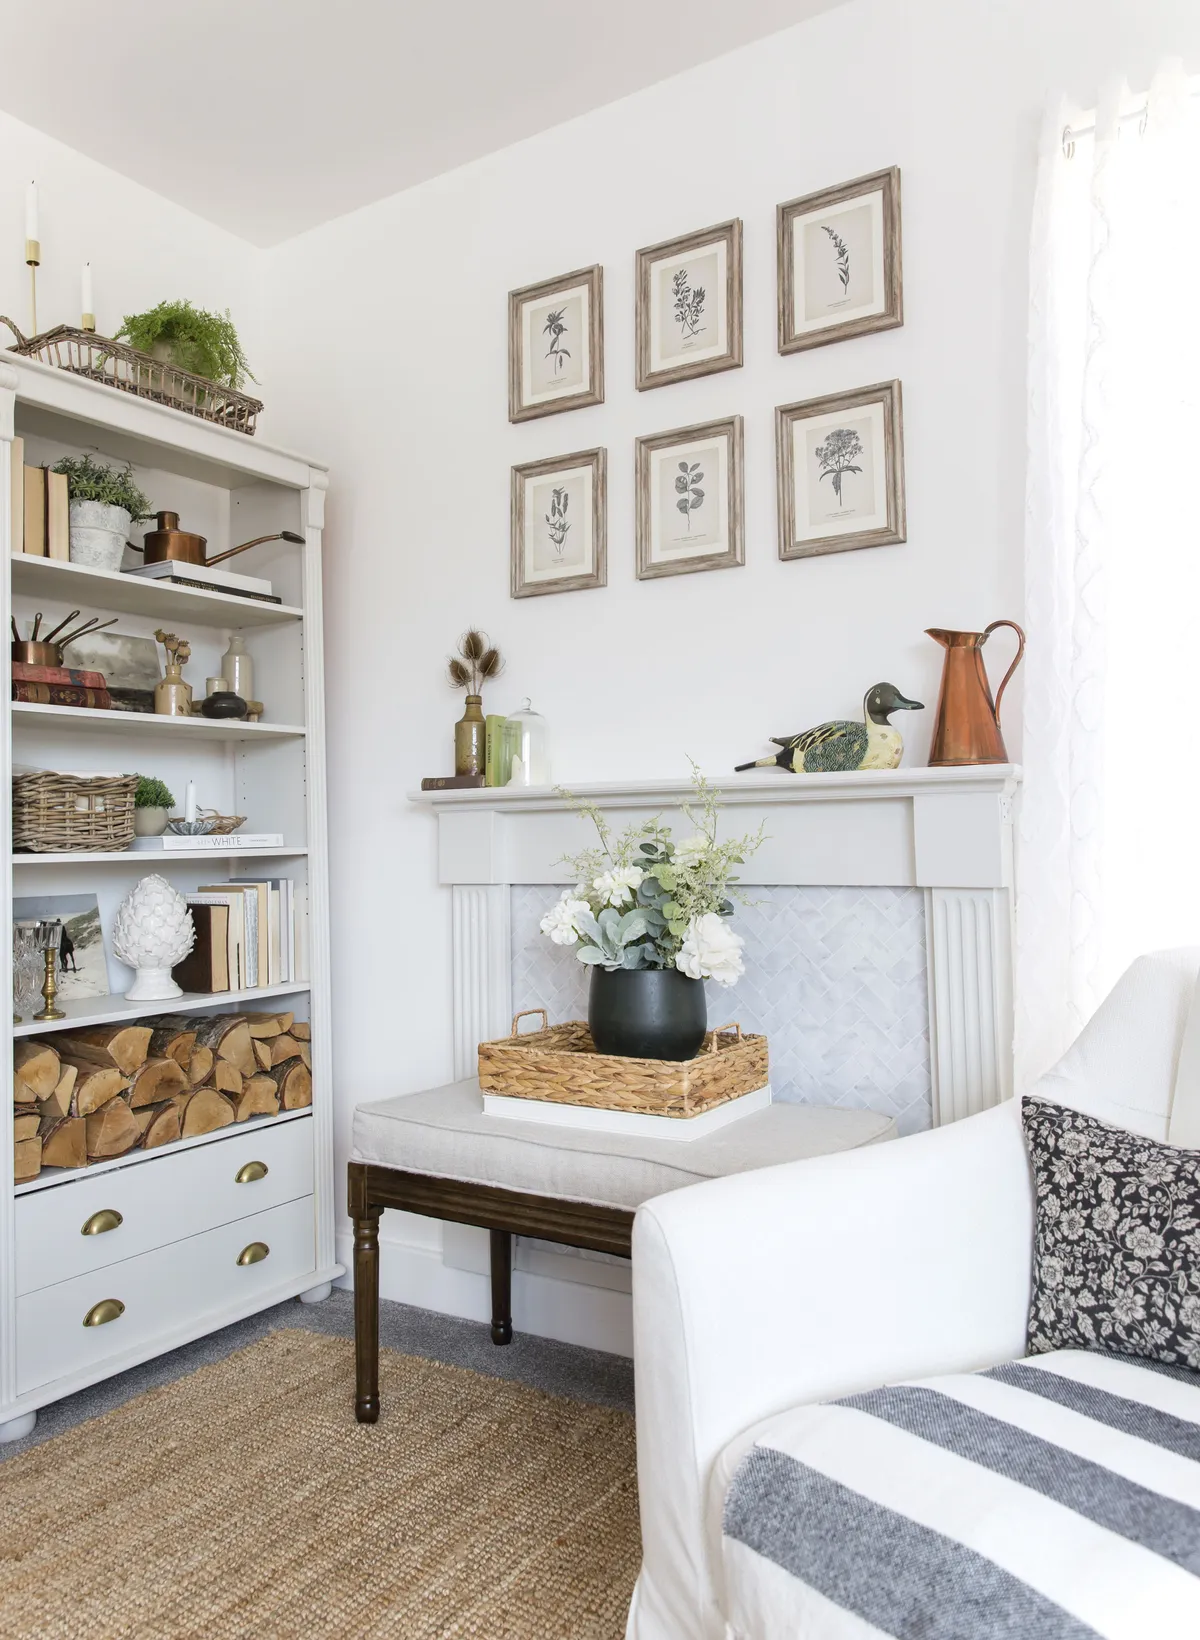 Stick-on tiles from Amazon have been used to fill the area inside the fireplace, while a bench from eBay sits in front and provides extra seating when needed. The bookcase was free on Facebook Marketplace and is perfect for showcasing Tilly’s vintage finds